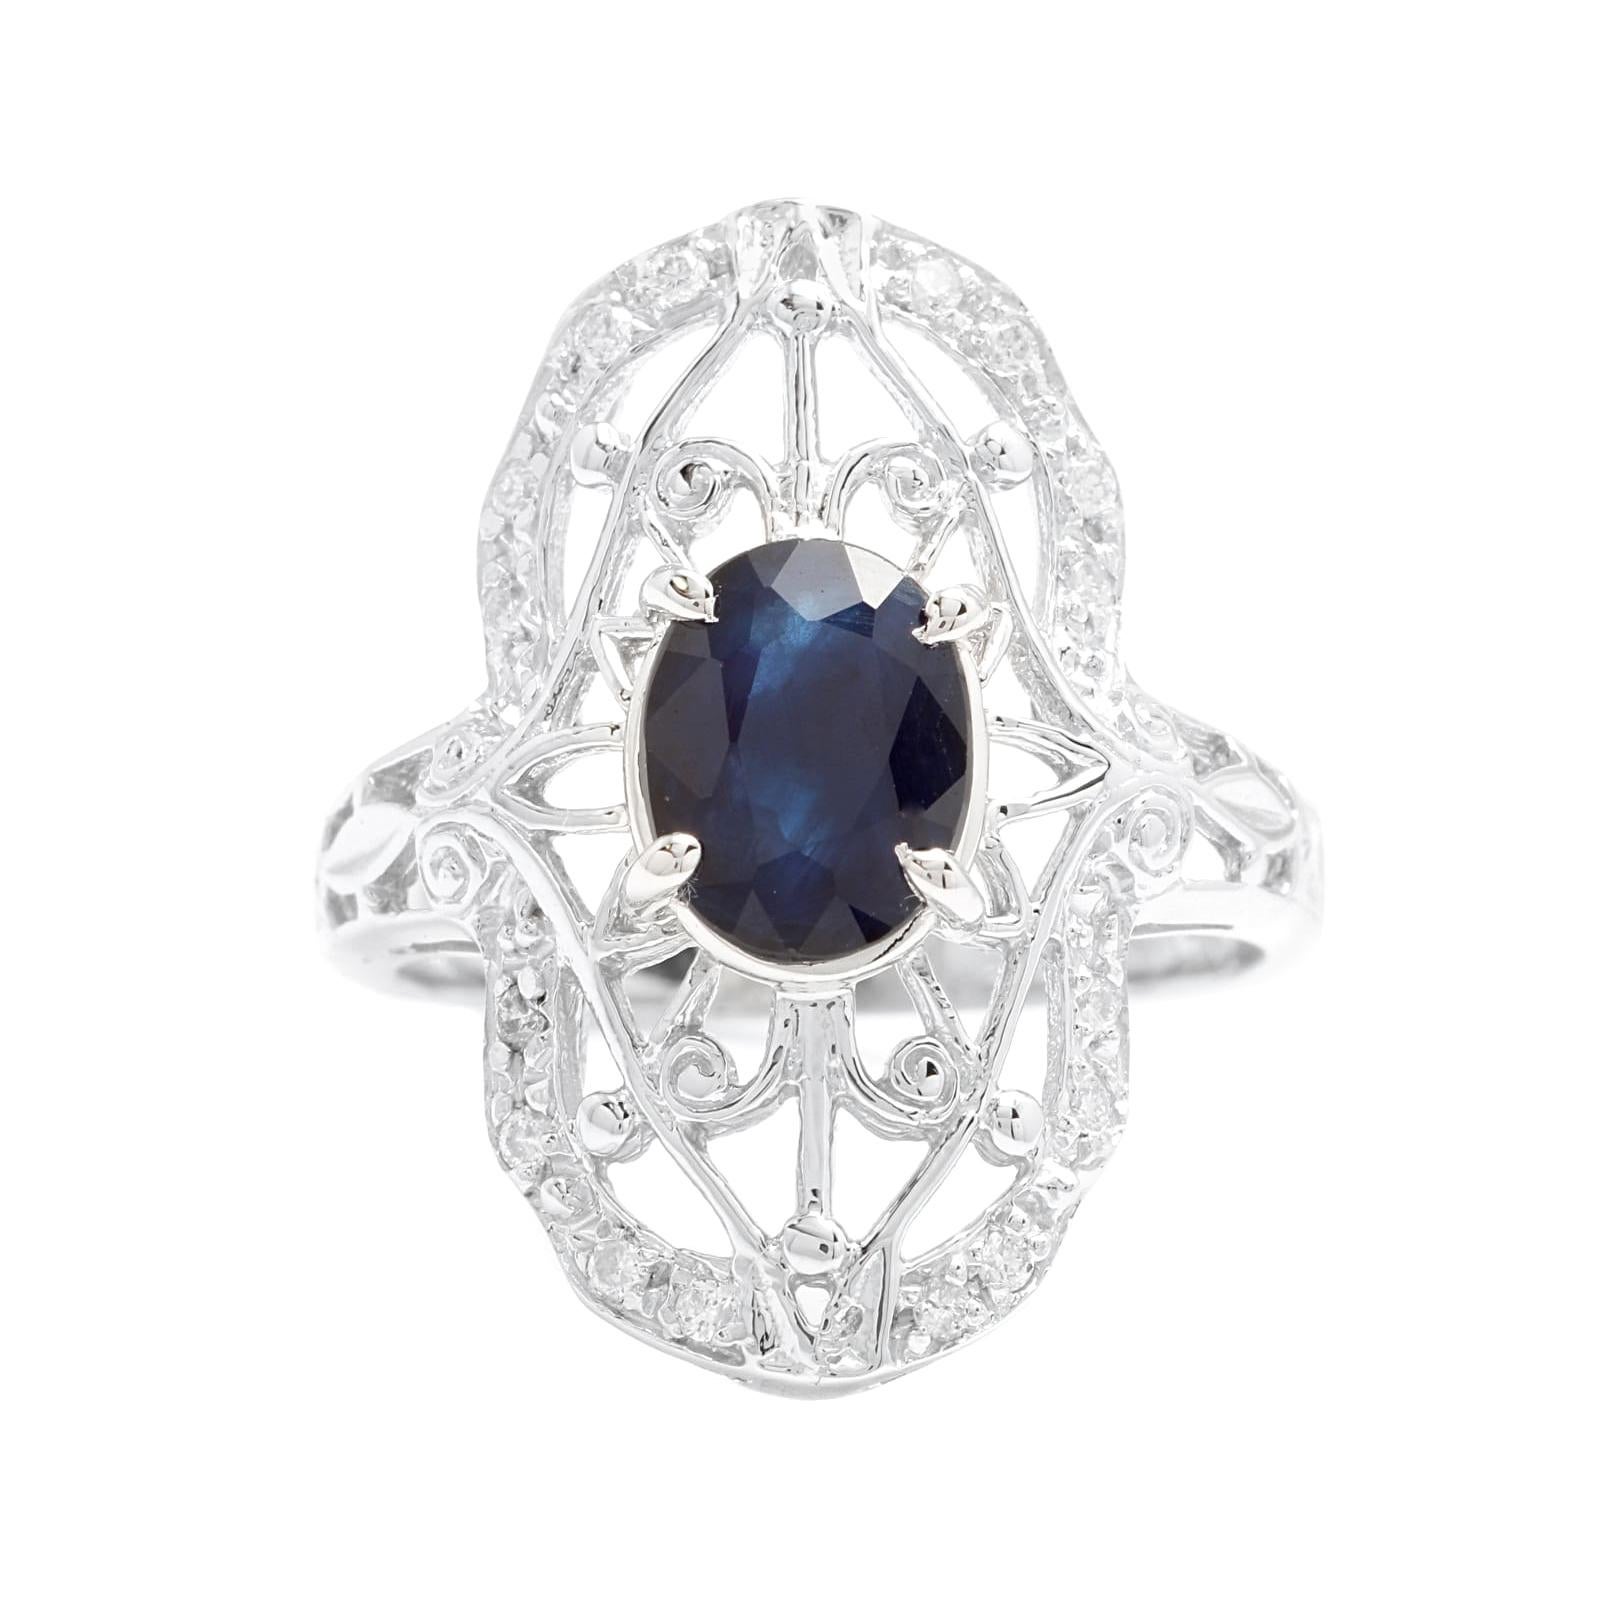 Art Deco Style 2.00ct Natural Sapphire and Diamond 14k Solid White Gold Ring